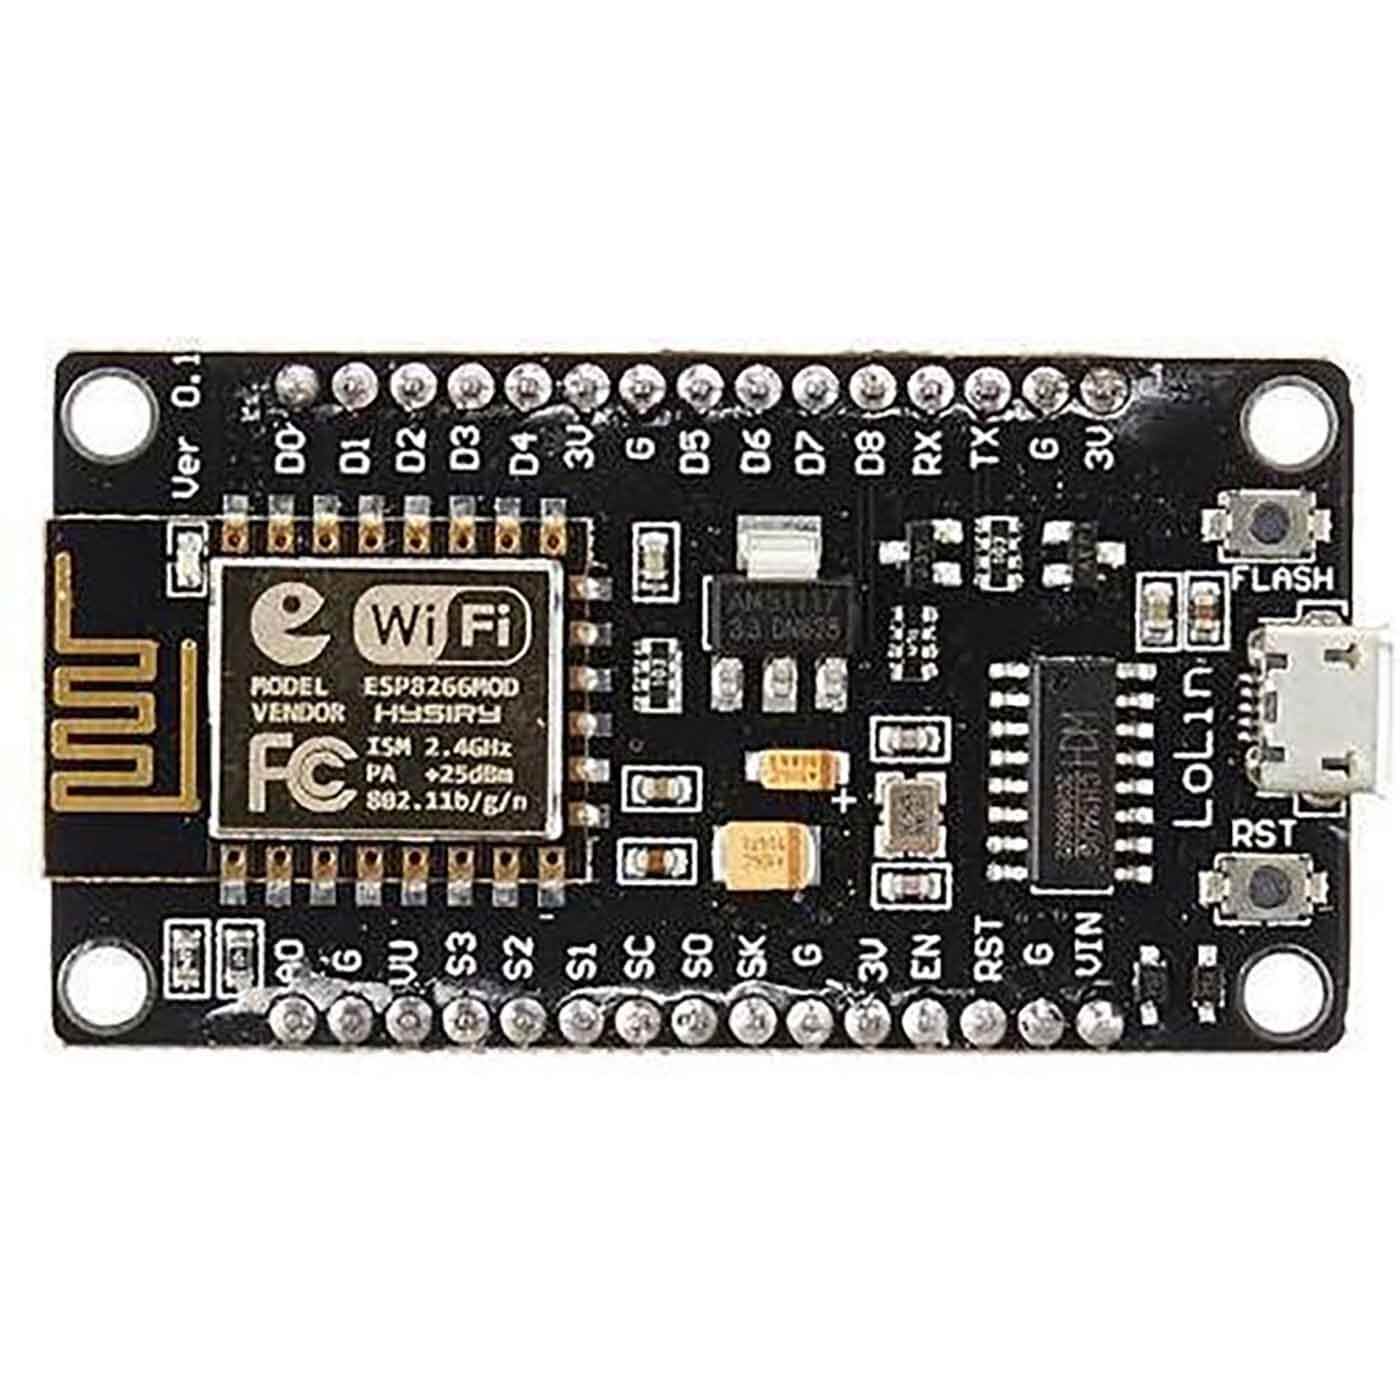 nodemcu library for proteus 8 download